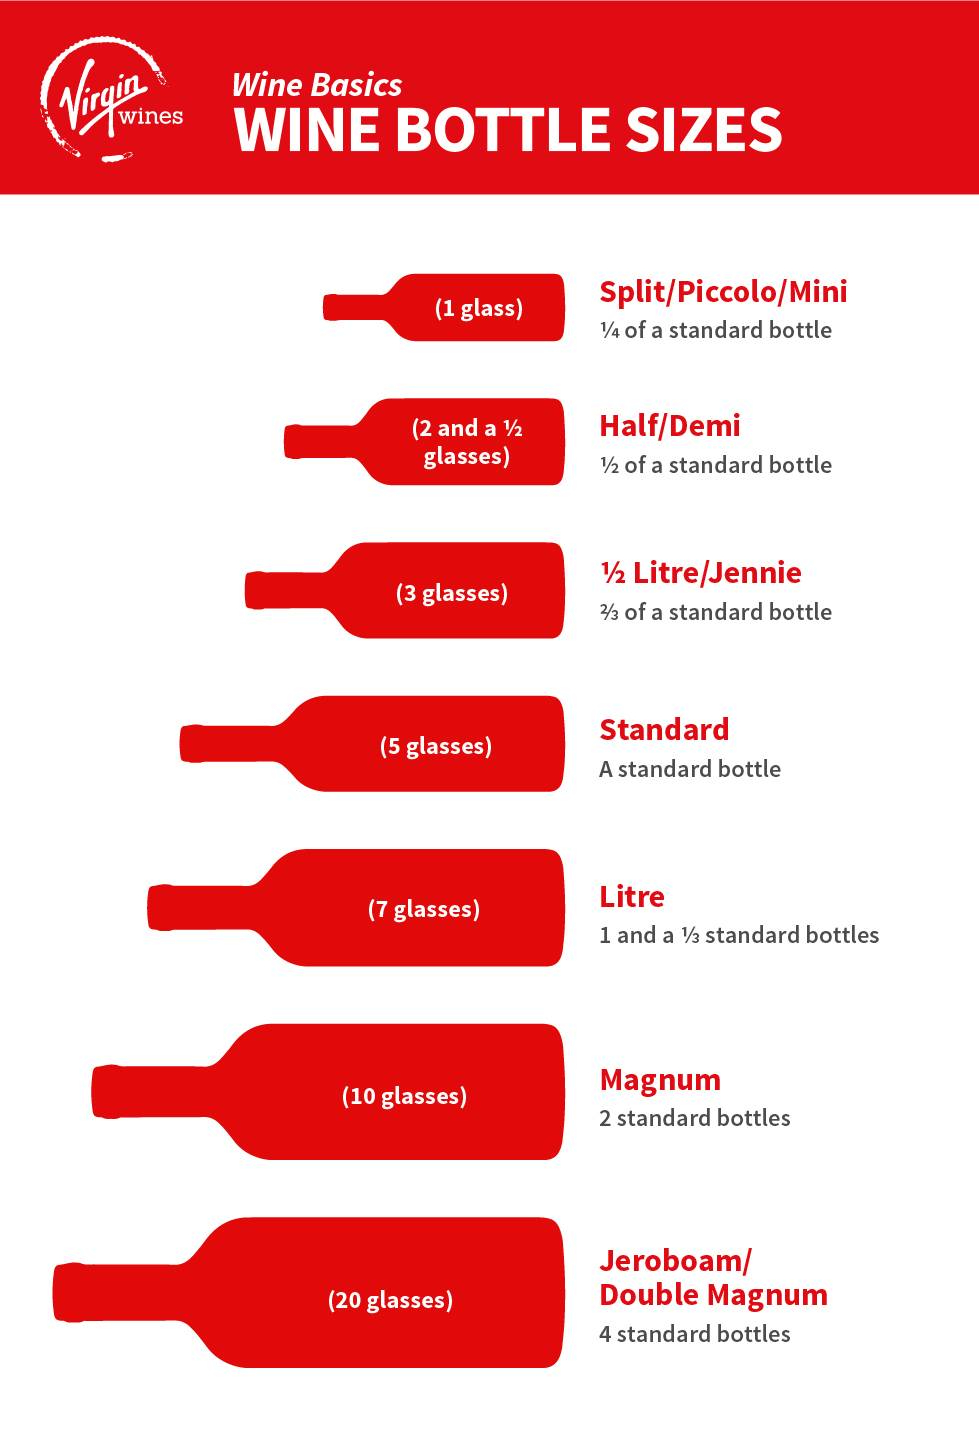 Infographic by Virgin Wines showing different wine bottle sizes and how many glasses of wine you can get out of each size bottle